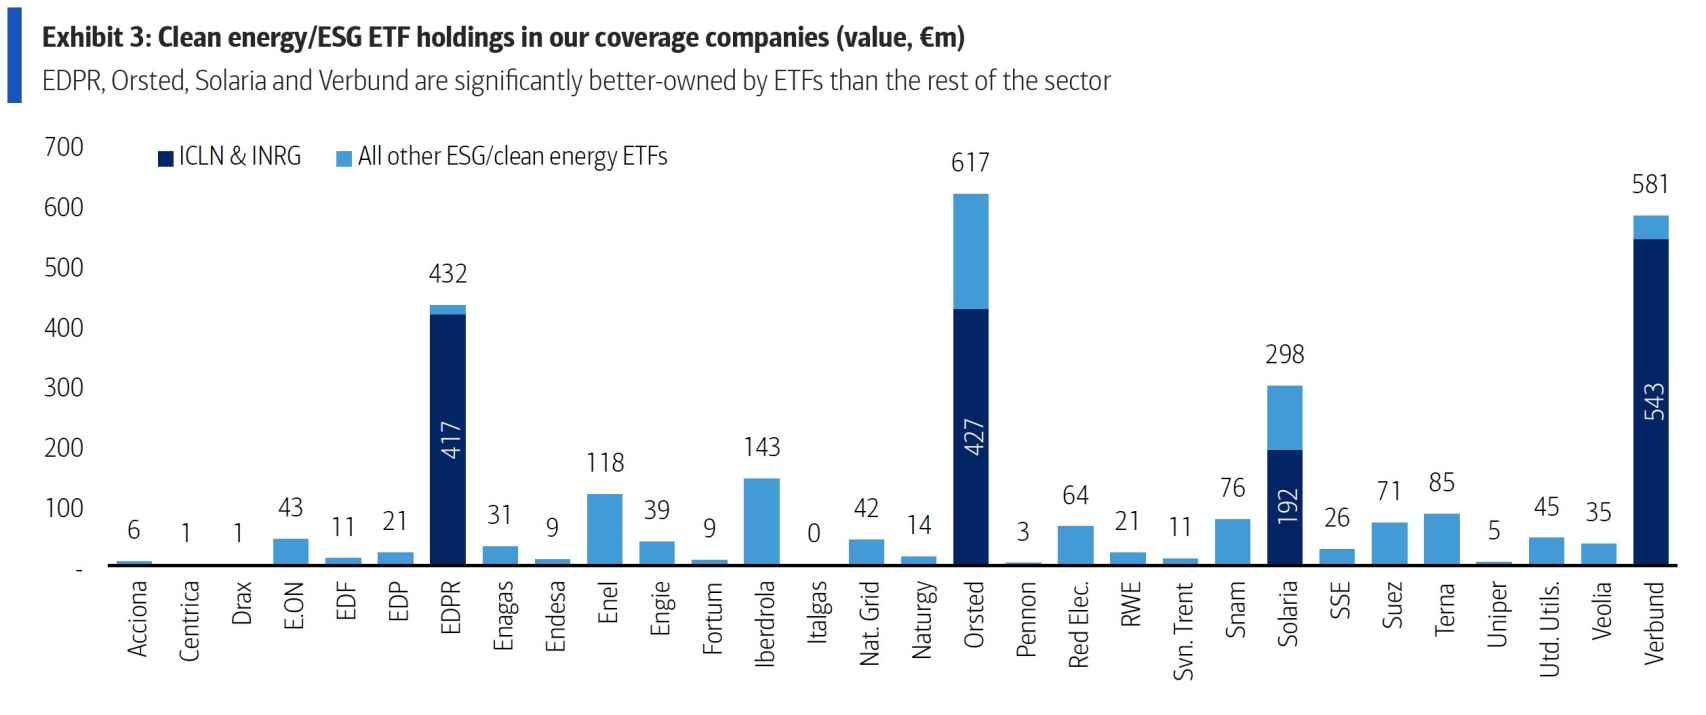 Clean Energy/ESG ETF holdings in our coverage companies